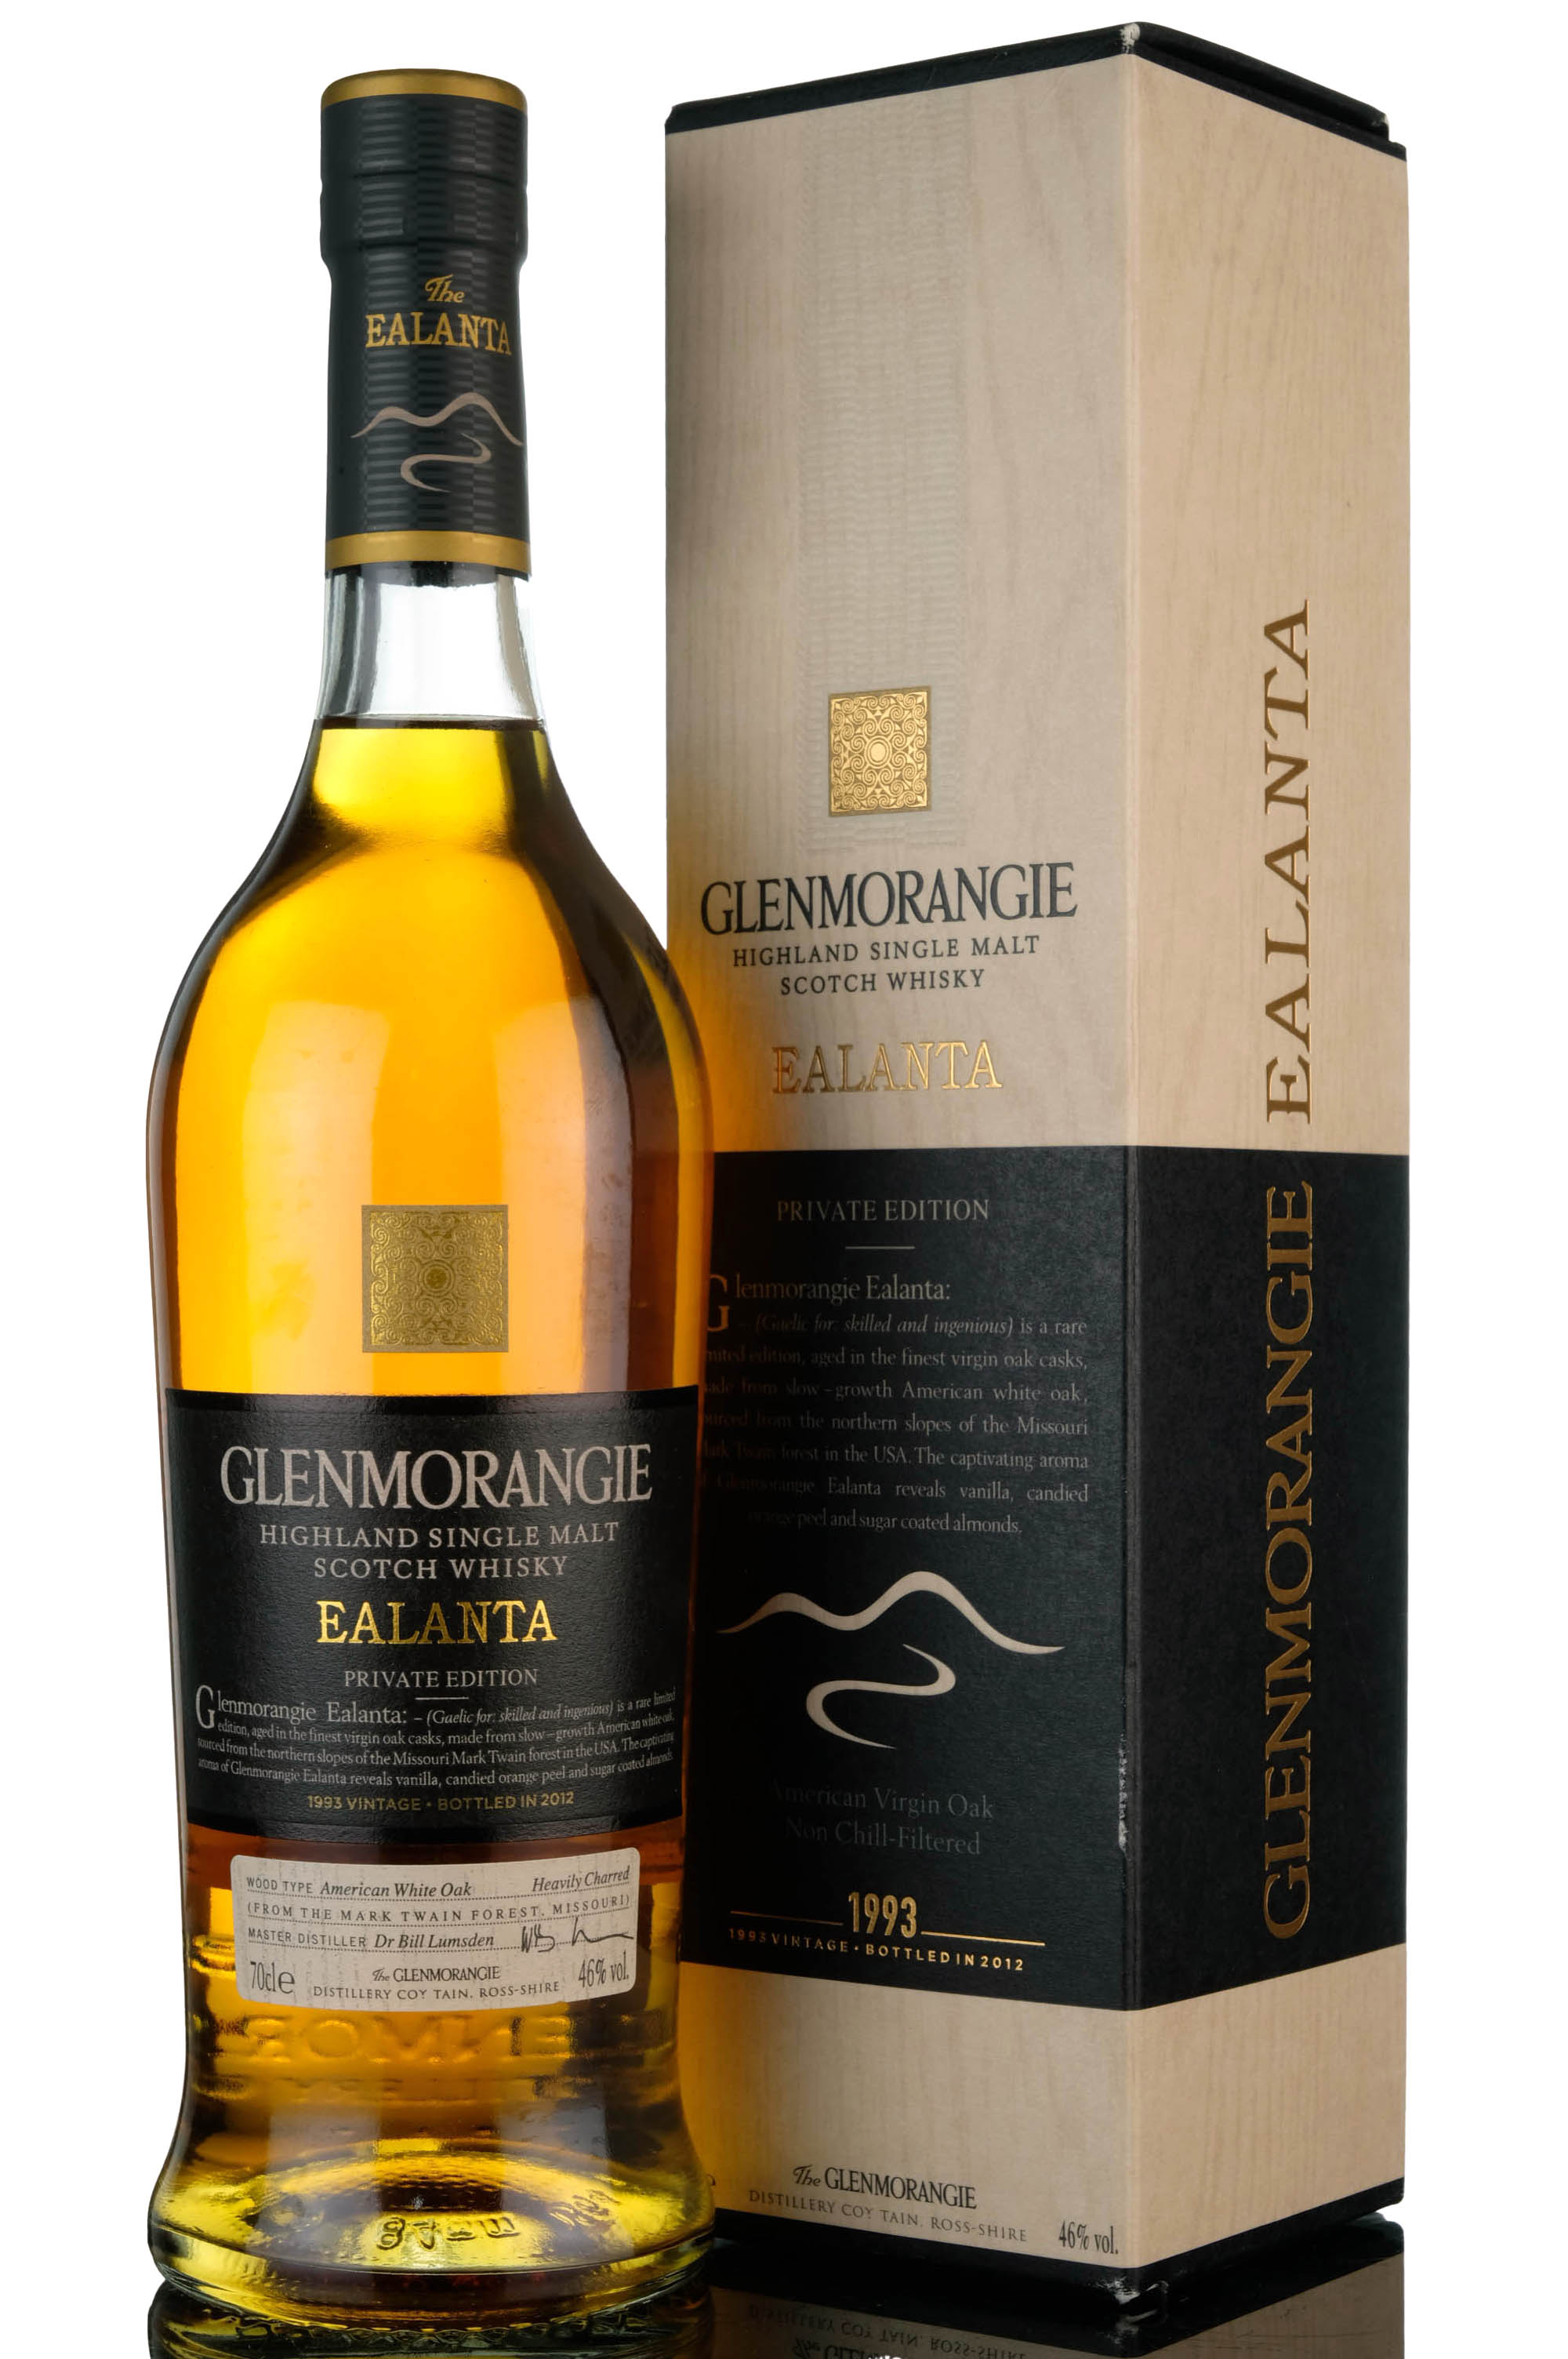 Glenmorangie 1993-2012 - 19 Year Old - Private Edition The Ealanta - 4th release